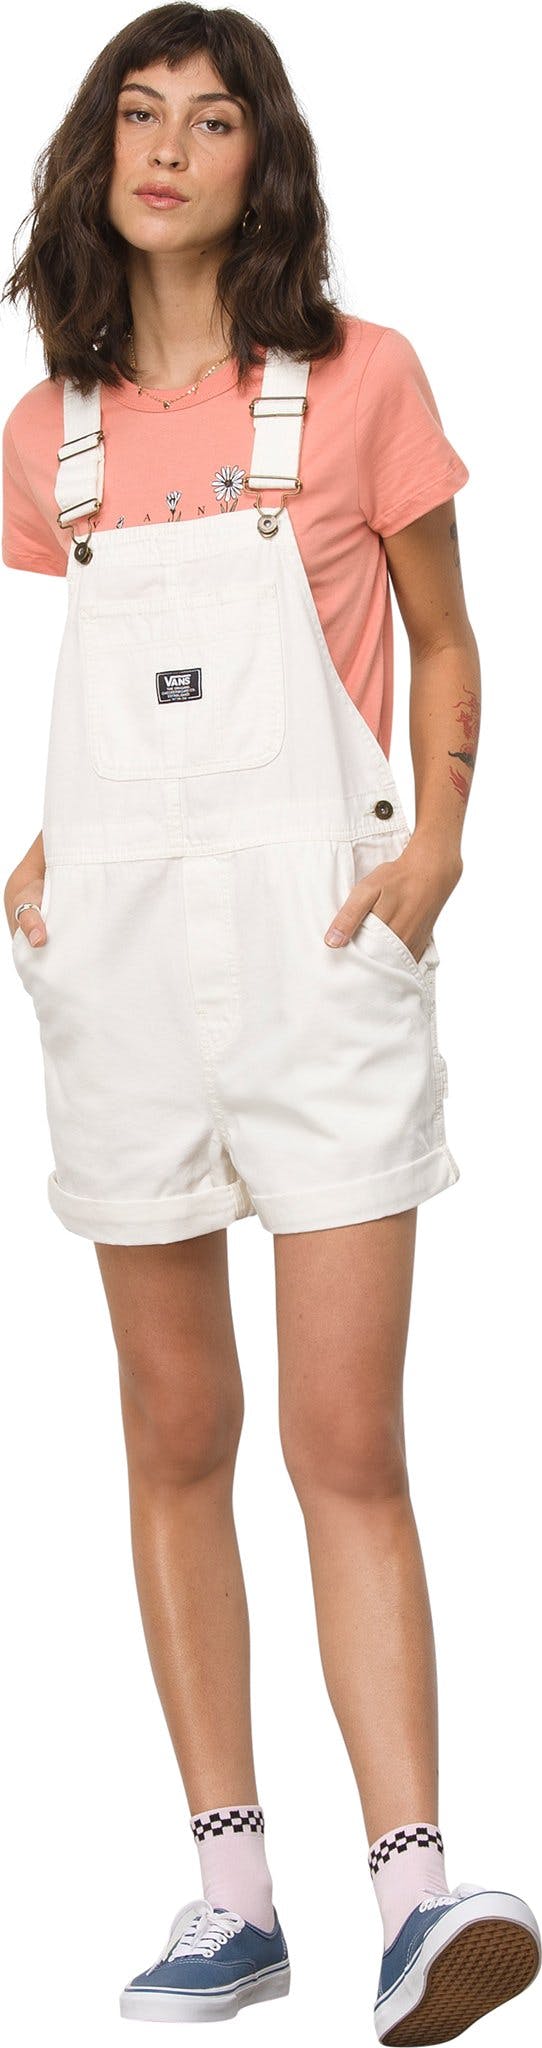 Product image for Ground Work Shortall Pants - Women's